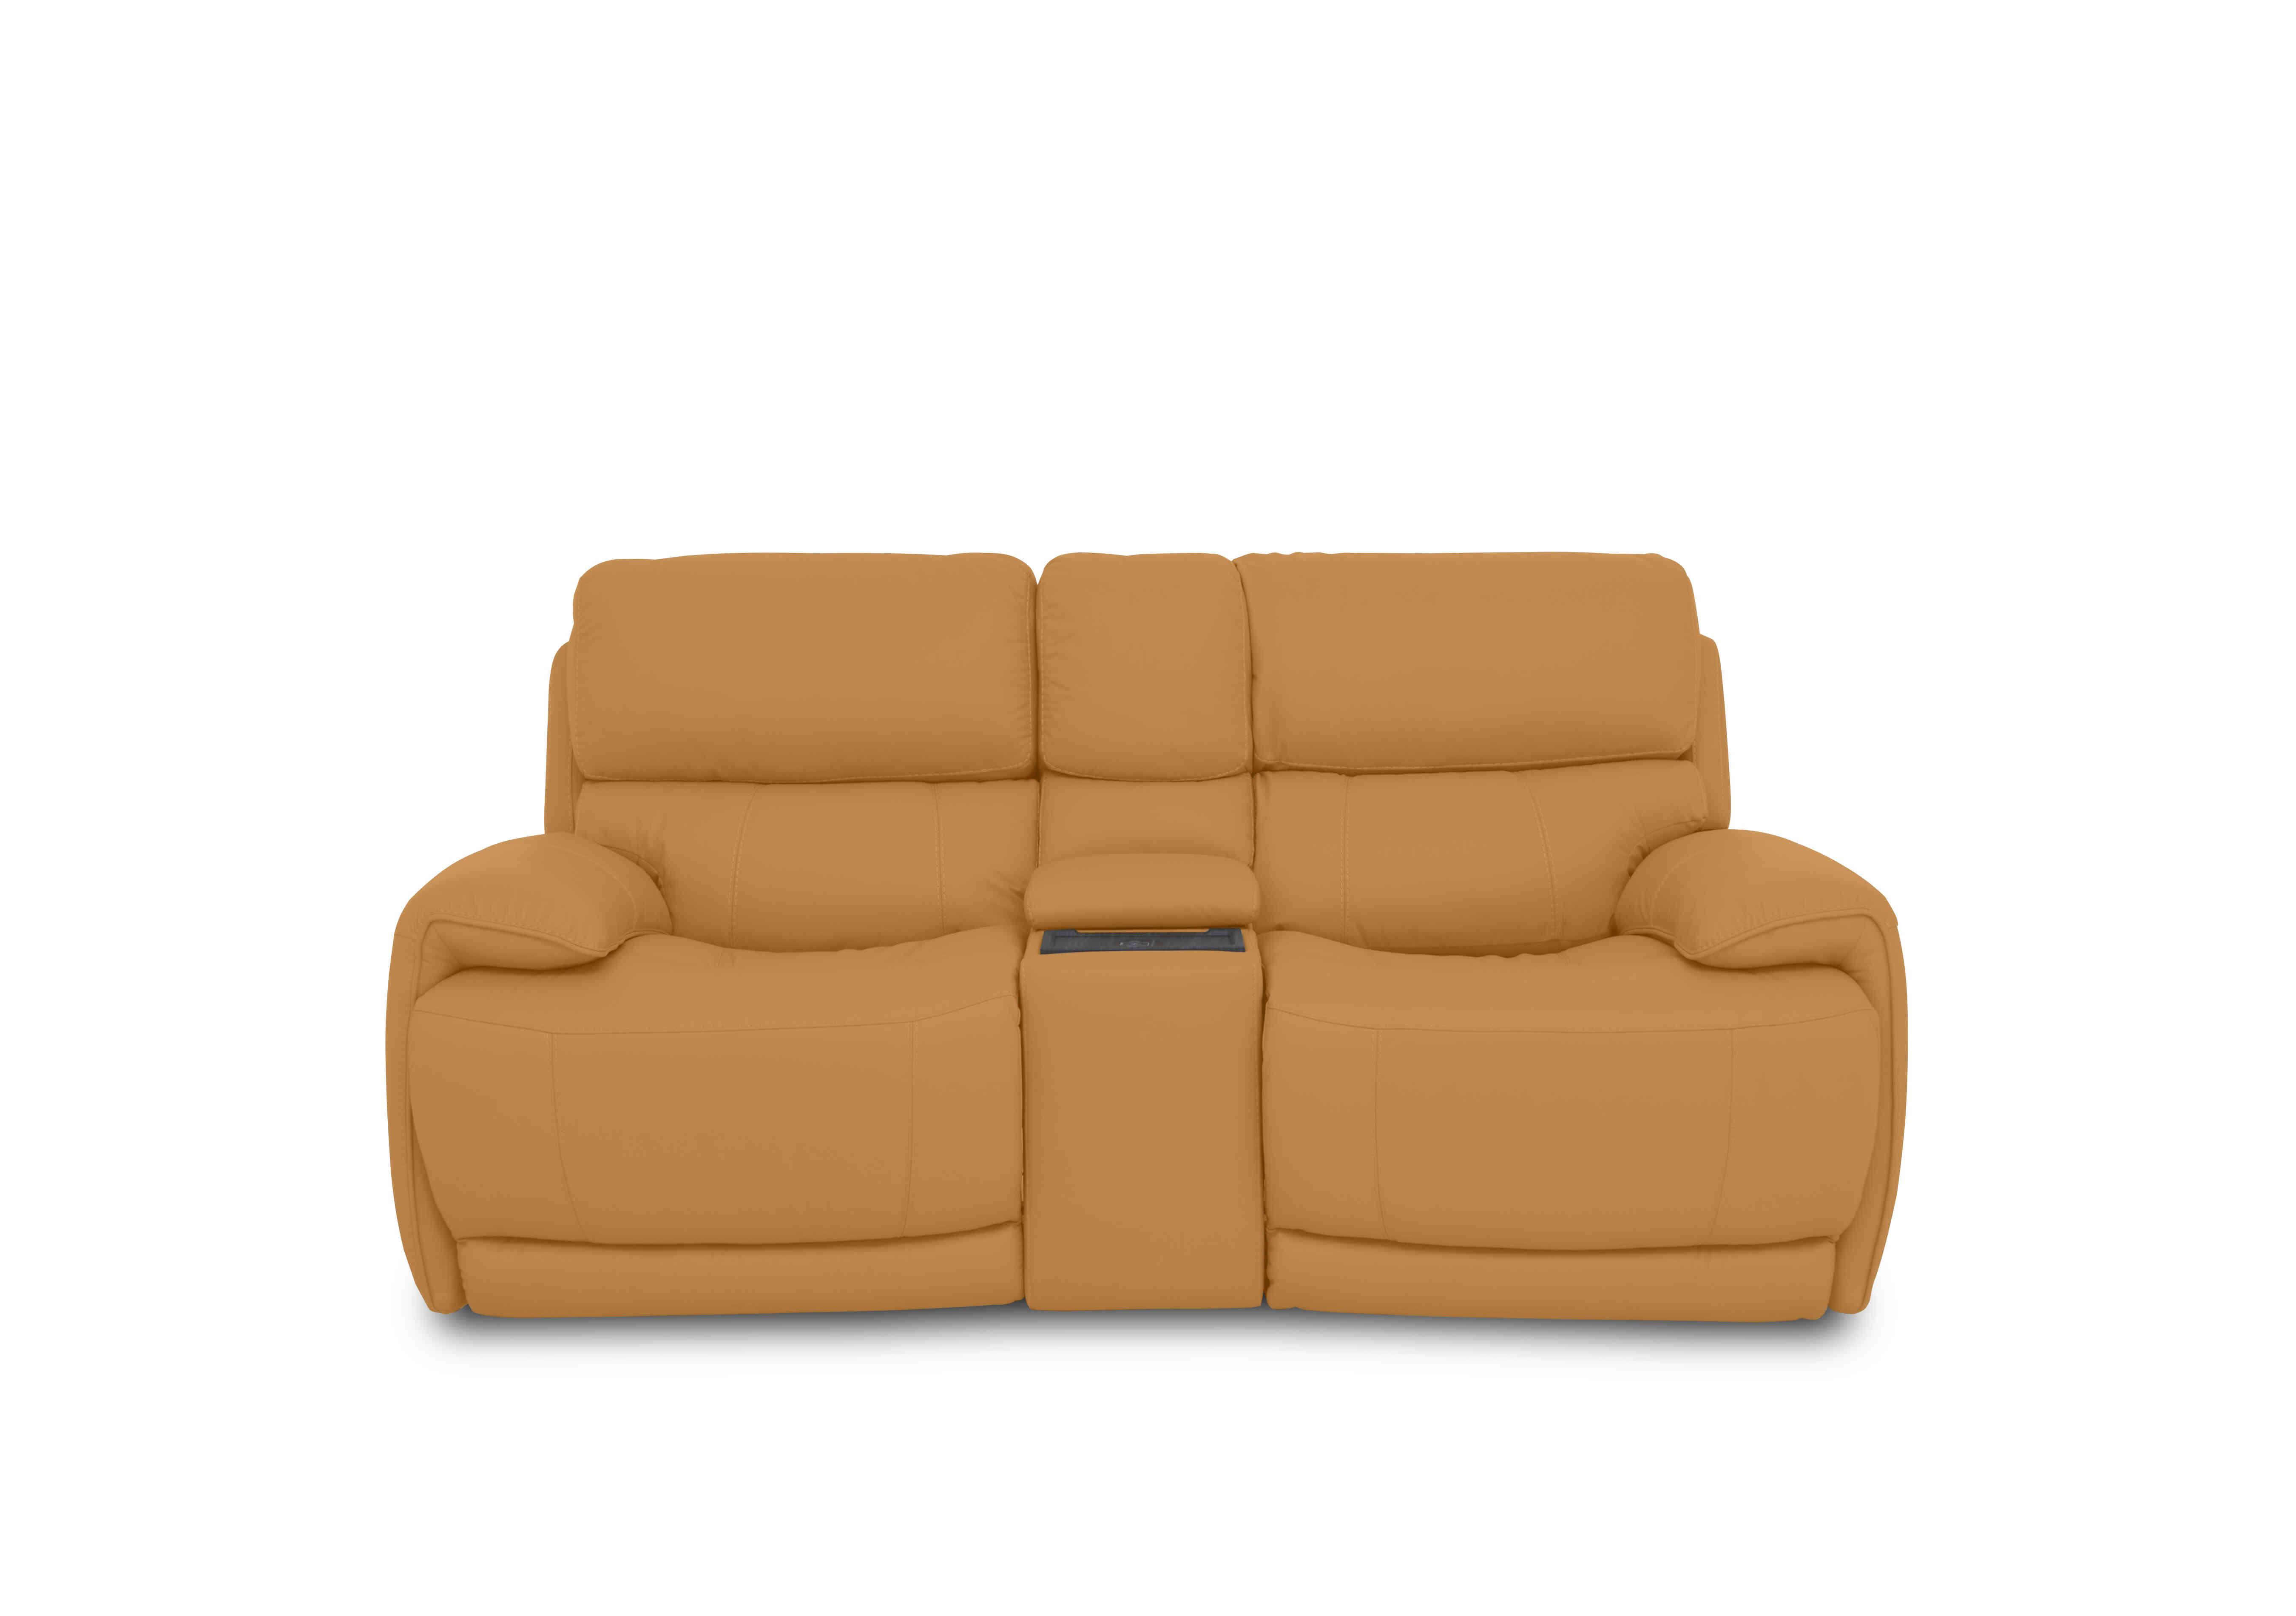 Rocco 2 Seater Leather Power Rocker Sofa with Cup Holders and Power Headrests in Bv-335e Honey Yellow on Furniture Village